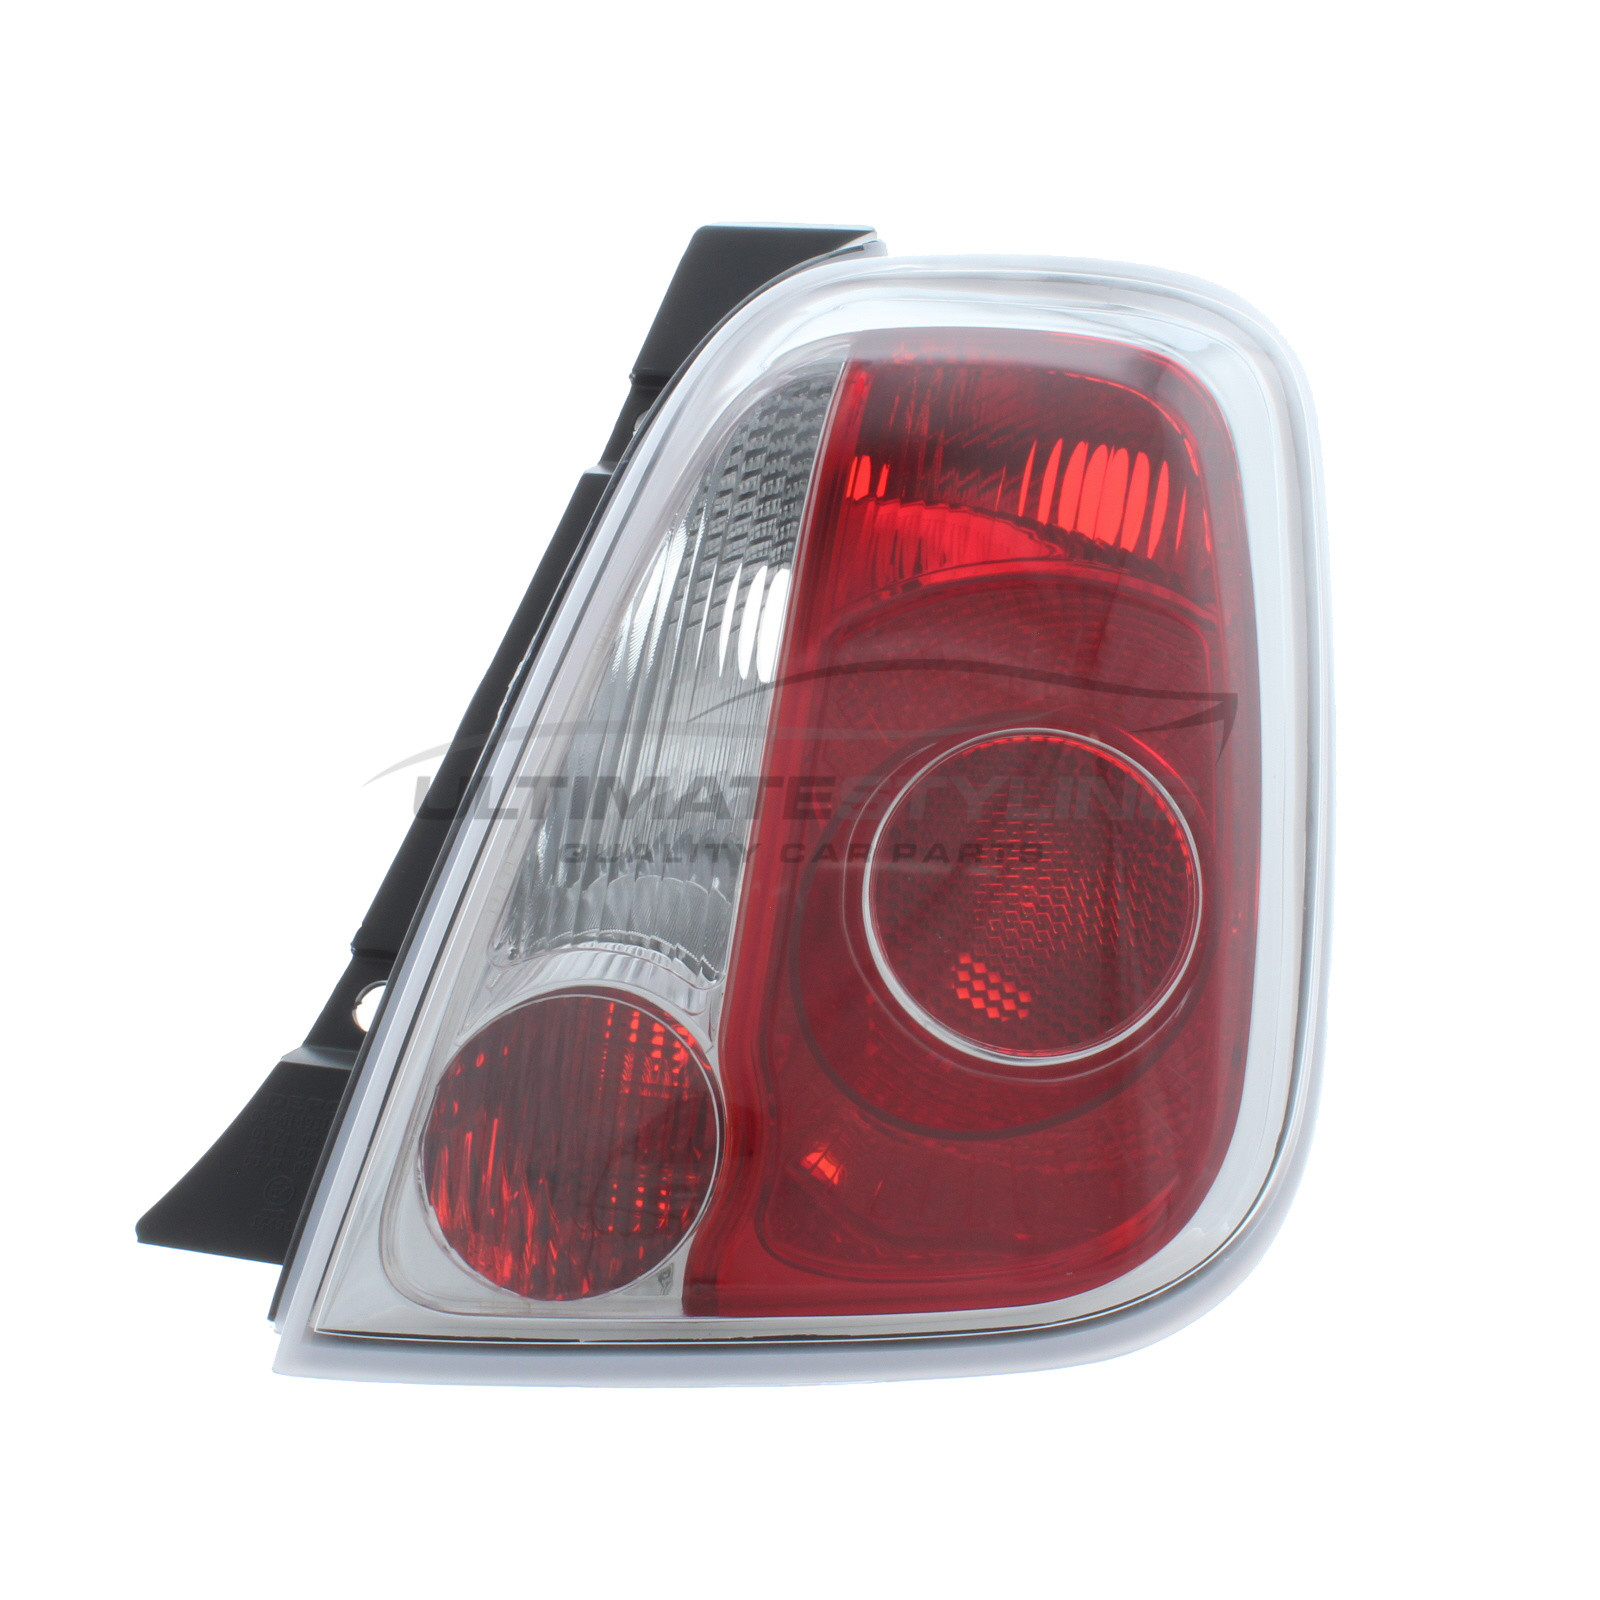 Abarth 500 2015-2016 / Abarth 595 2015-2016 / Abarth 695 2015-2016 / Fiat 500 2008-2015 Non-LED Rear Light / Tail Light Excluding Bulb Holder Drivers Side (RH)